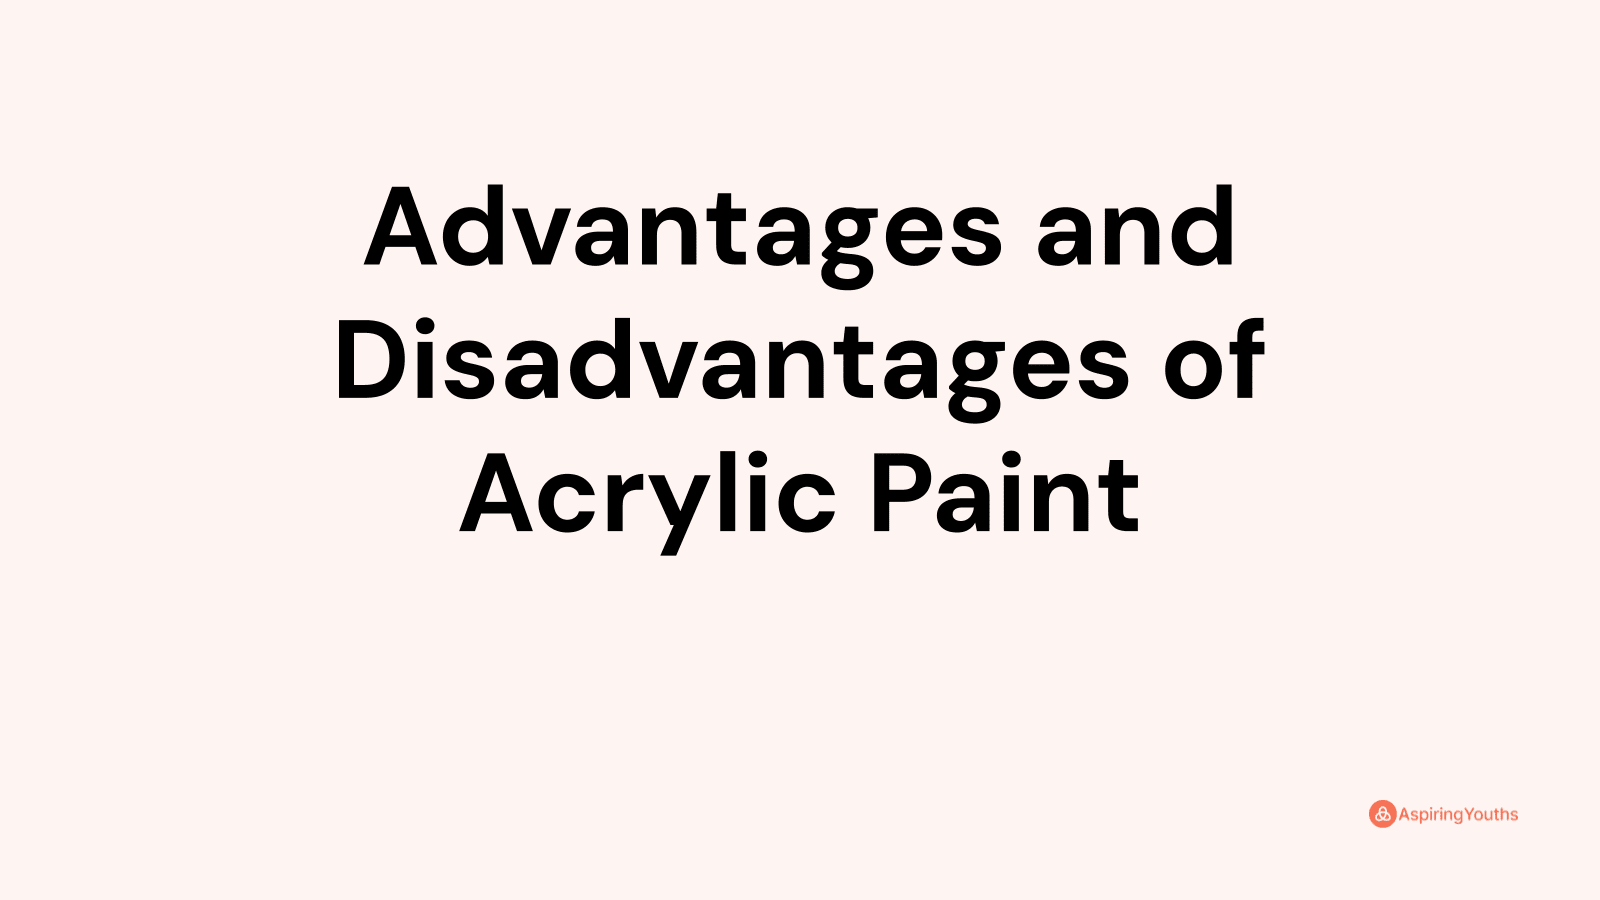 Advantages and disadvantages of Acrylic Paint